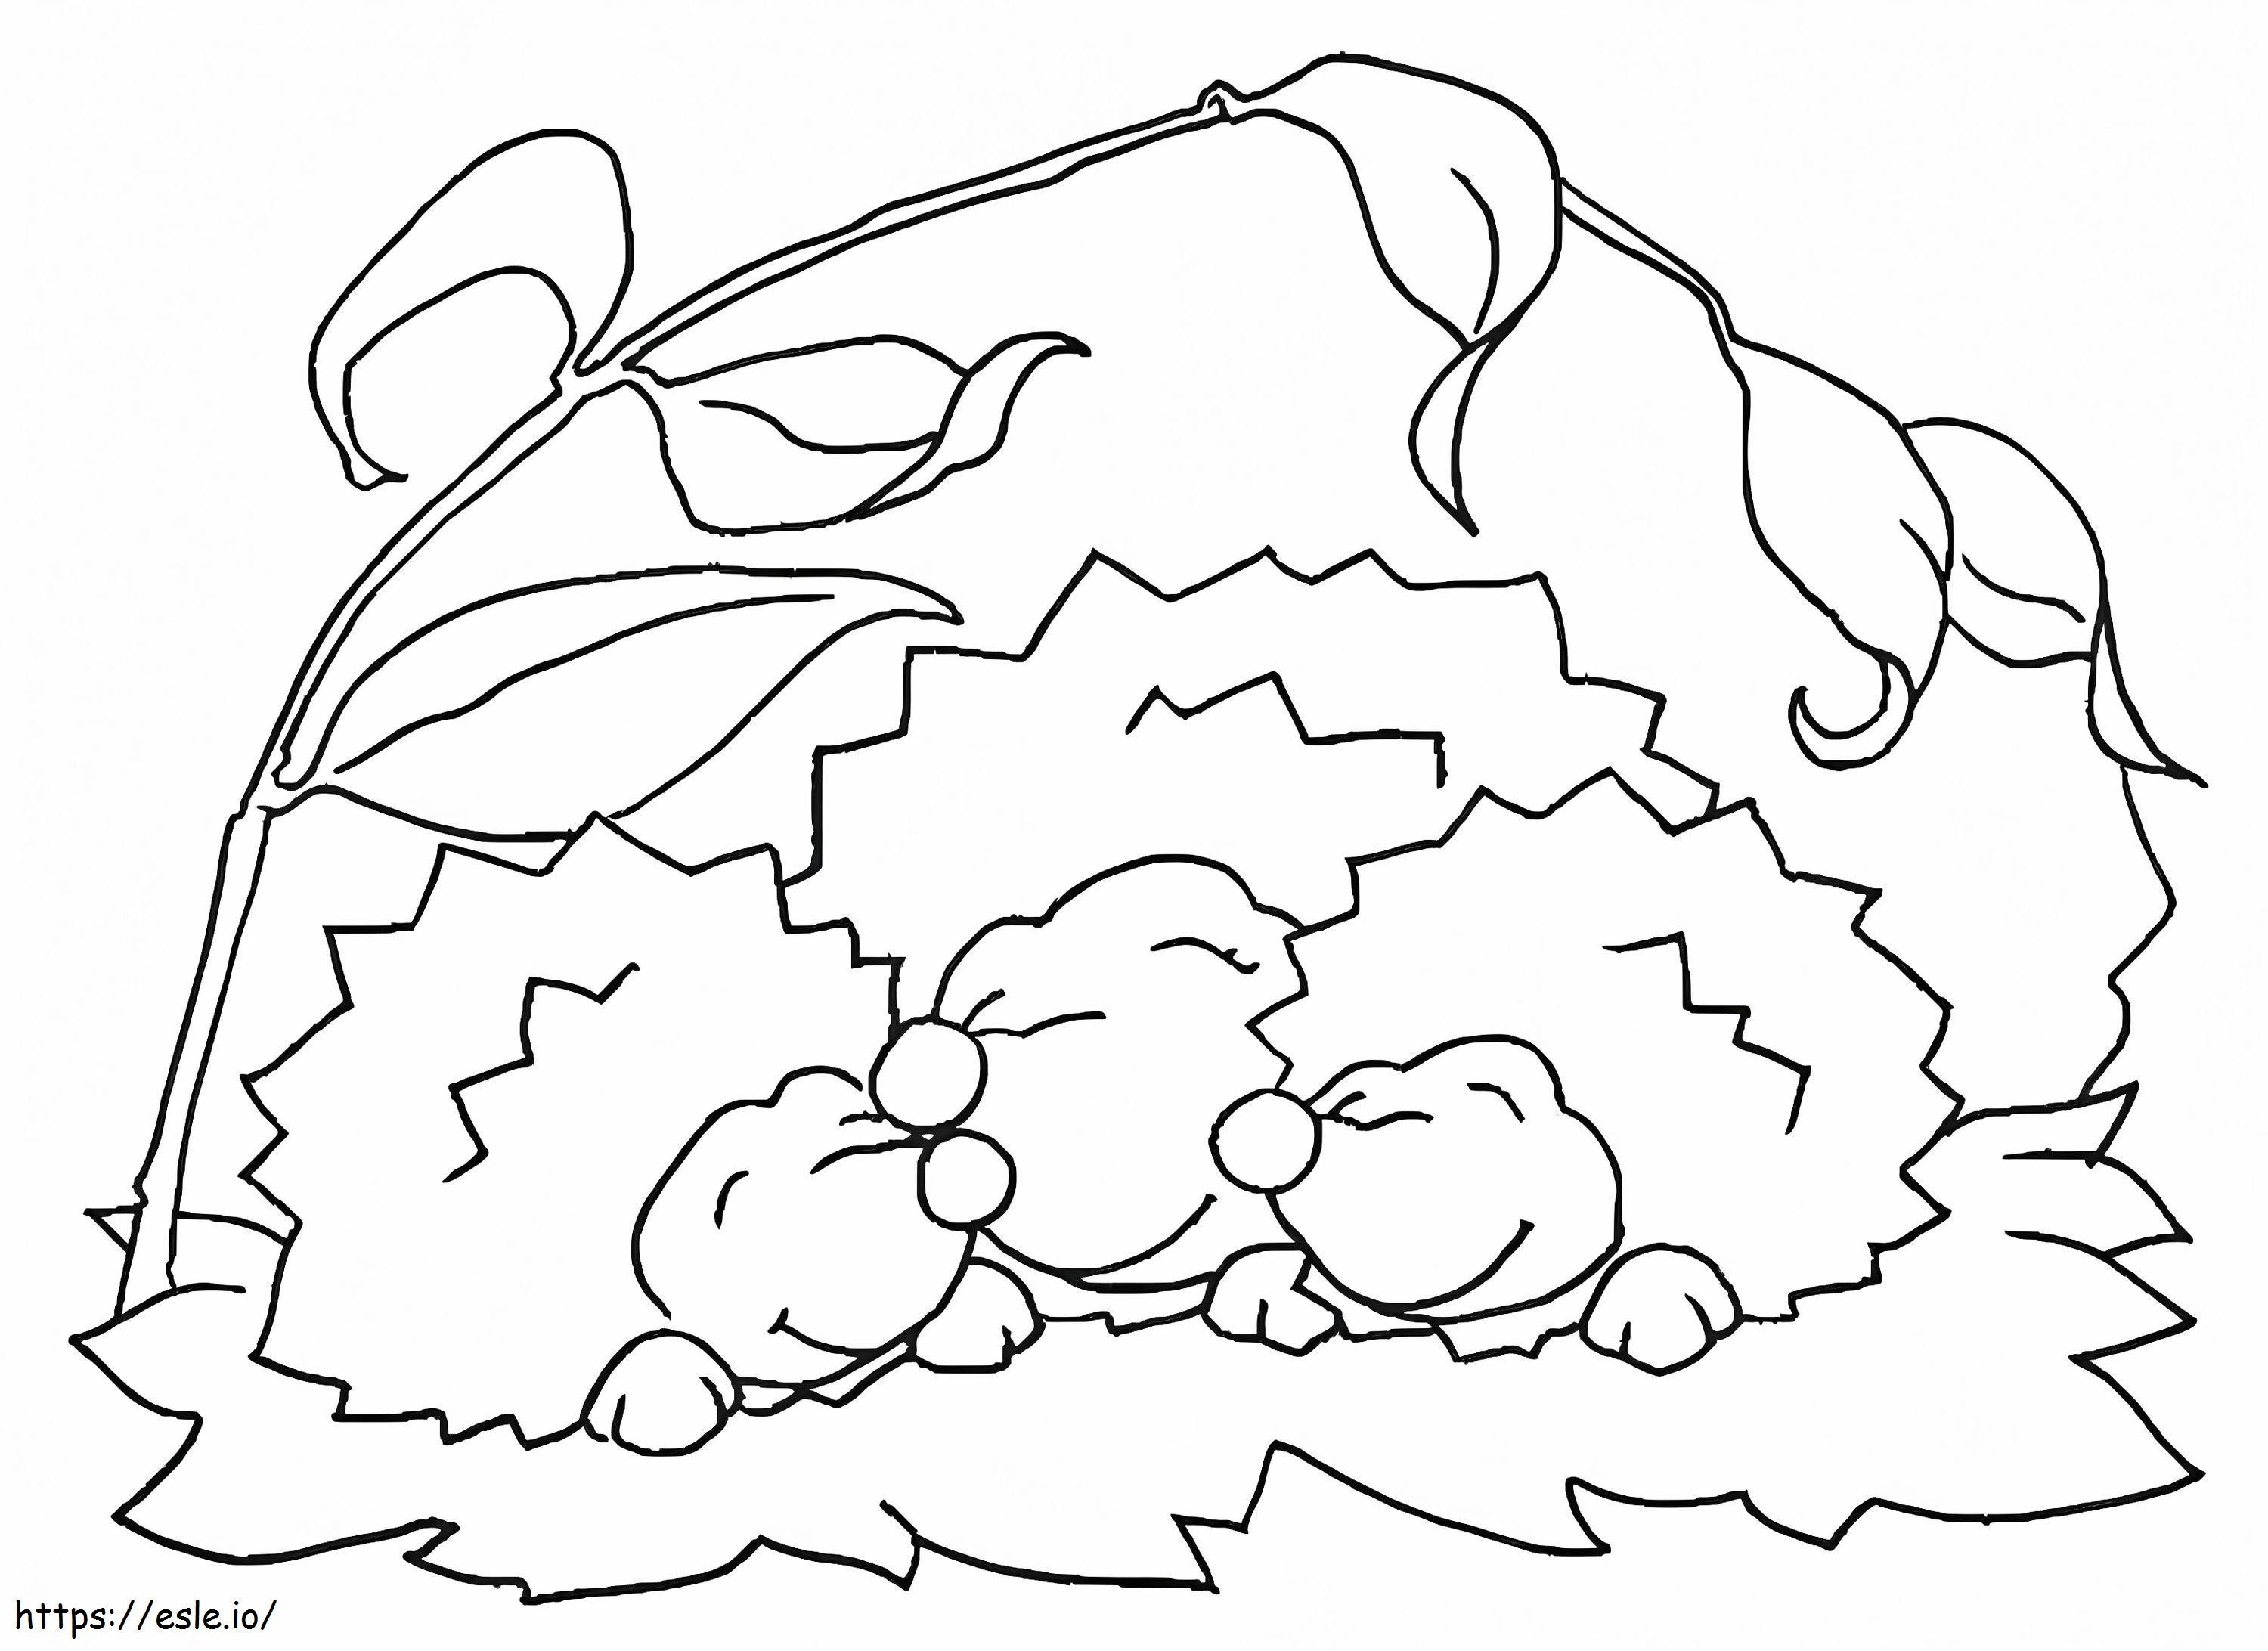 Three Smiling Hedgehogs coloring page